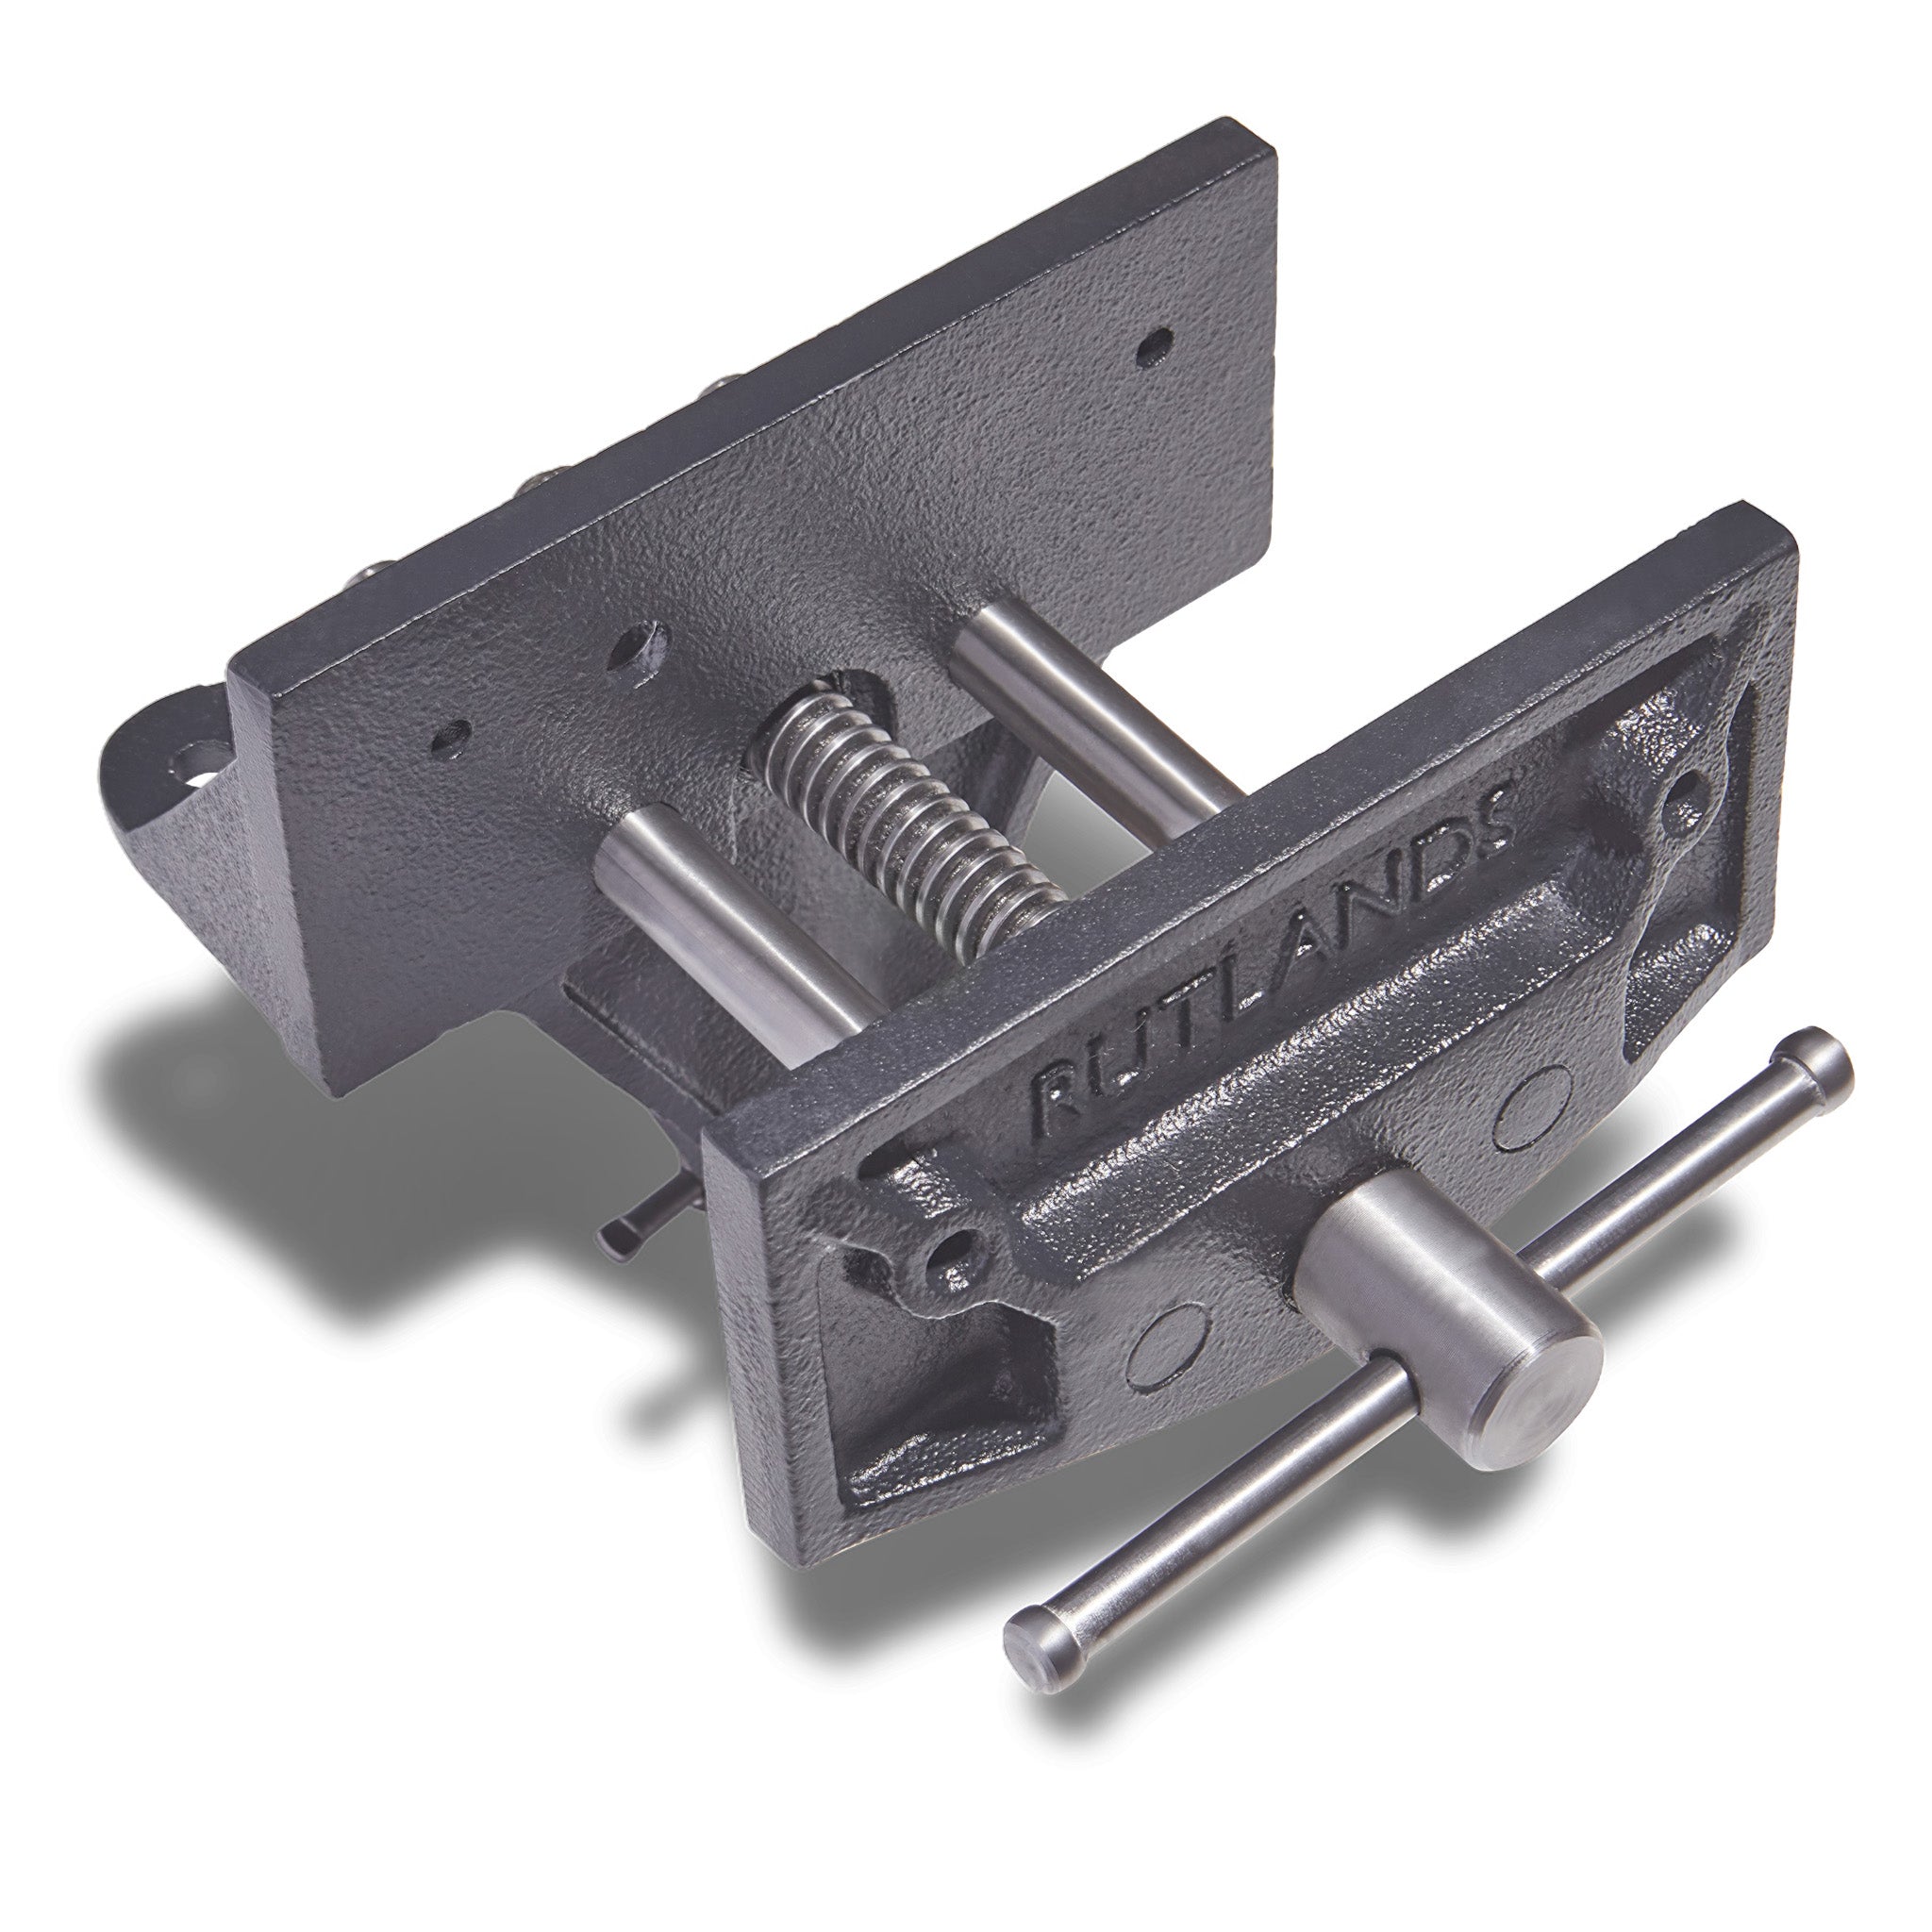 Joinery Clamps  Next Day Delivery – Rutlands Limited